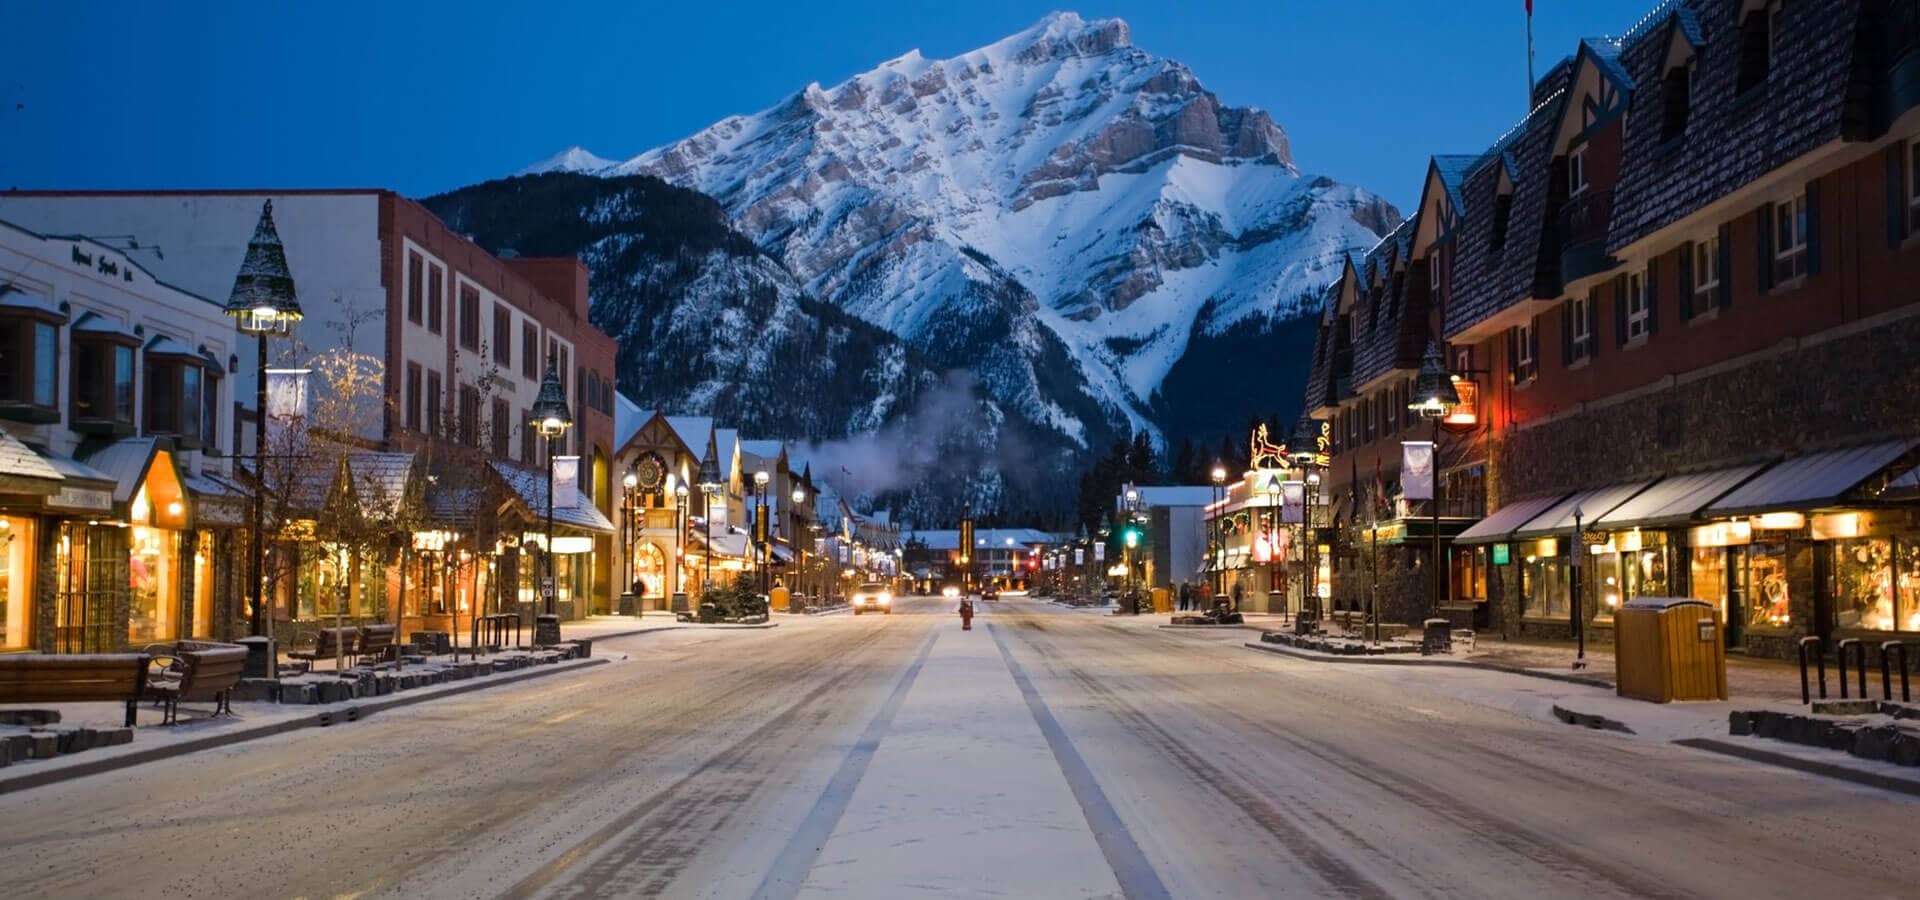 About Banff & Local Attractions